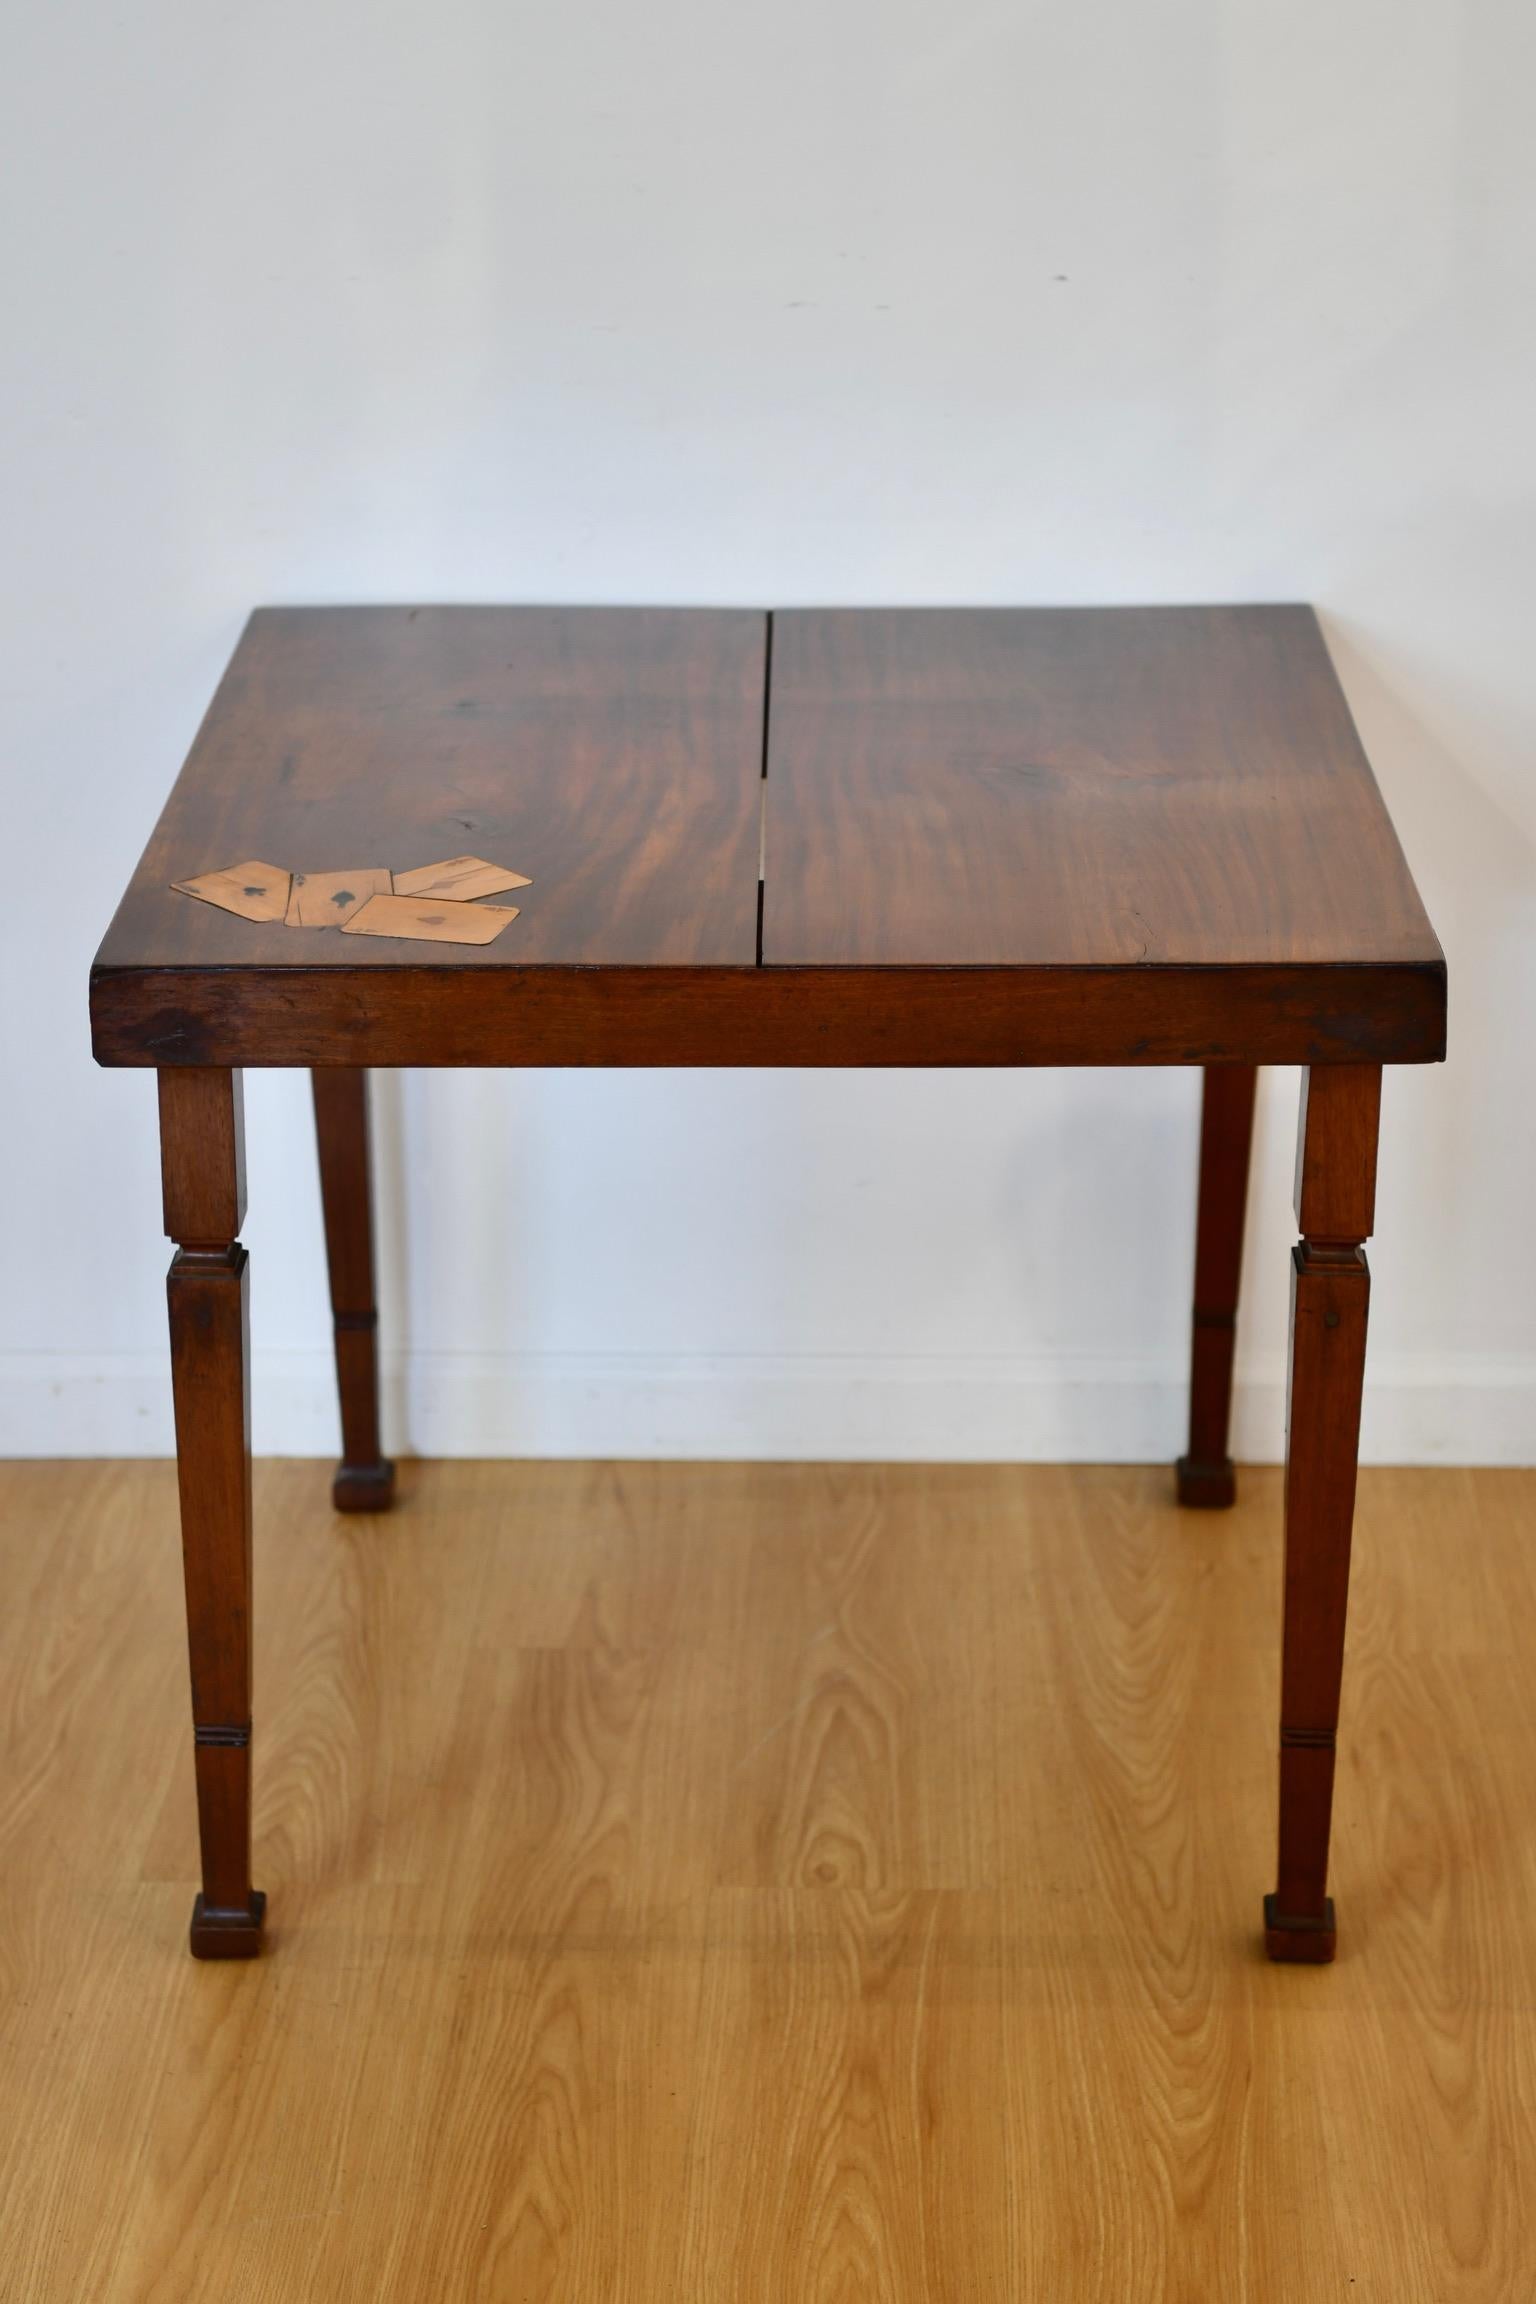 Art Deco mahogany square games table with inlay of four aces playing cards and raised on square tapered legs. Dimensions: 26.5